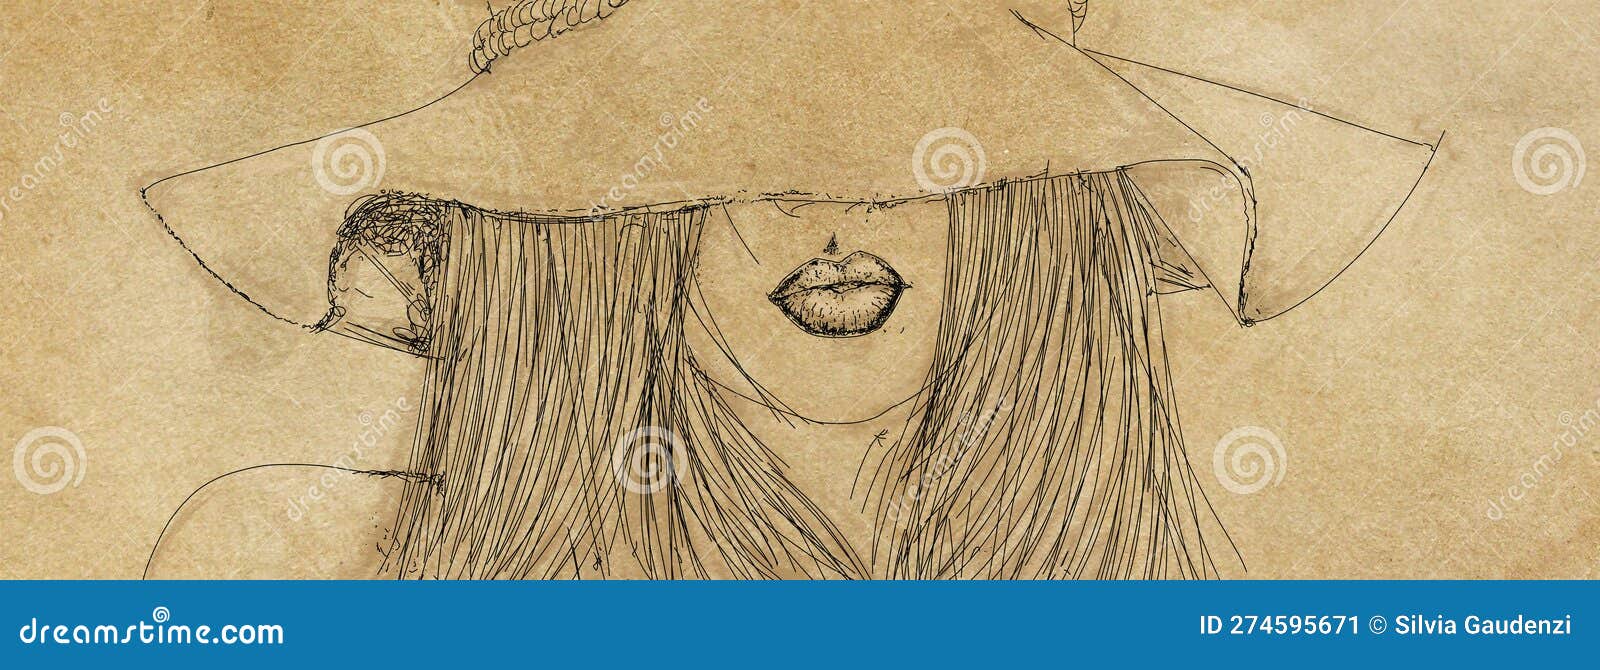 drawing of a woman in a hat on an old paper background.vintage style.